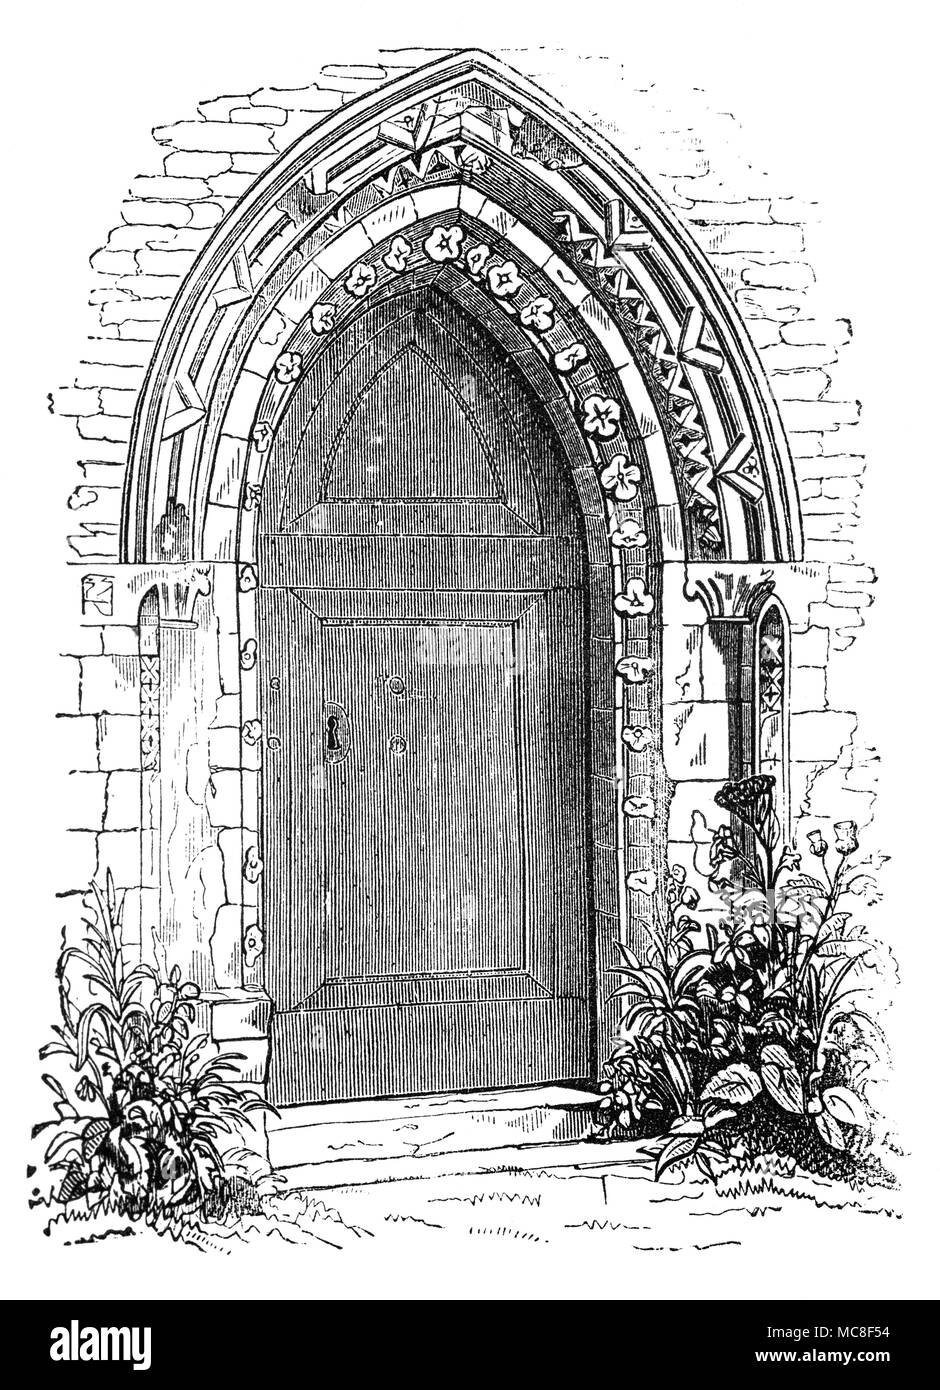 The Romanesque styled doorway of 13th-century parish church, dedicated to St Mary the Virgin at Stone, was known as the 'Lantern of Kent' for its beacon light known to all sailors on the river,  is renowned for its Gothic sculpture made by the masons who built Westminster Abbey. An impressive example of Early English church architecture it's likely that it was funded by pilgrims passing along Watling Street, following the murder of Thomas à Becket at Canterbury in 1170. Stock Photo